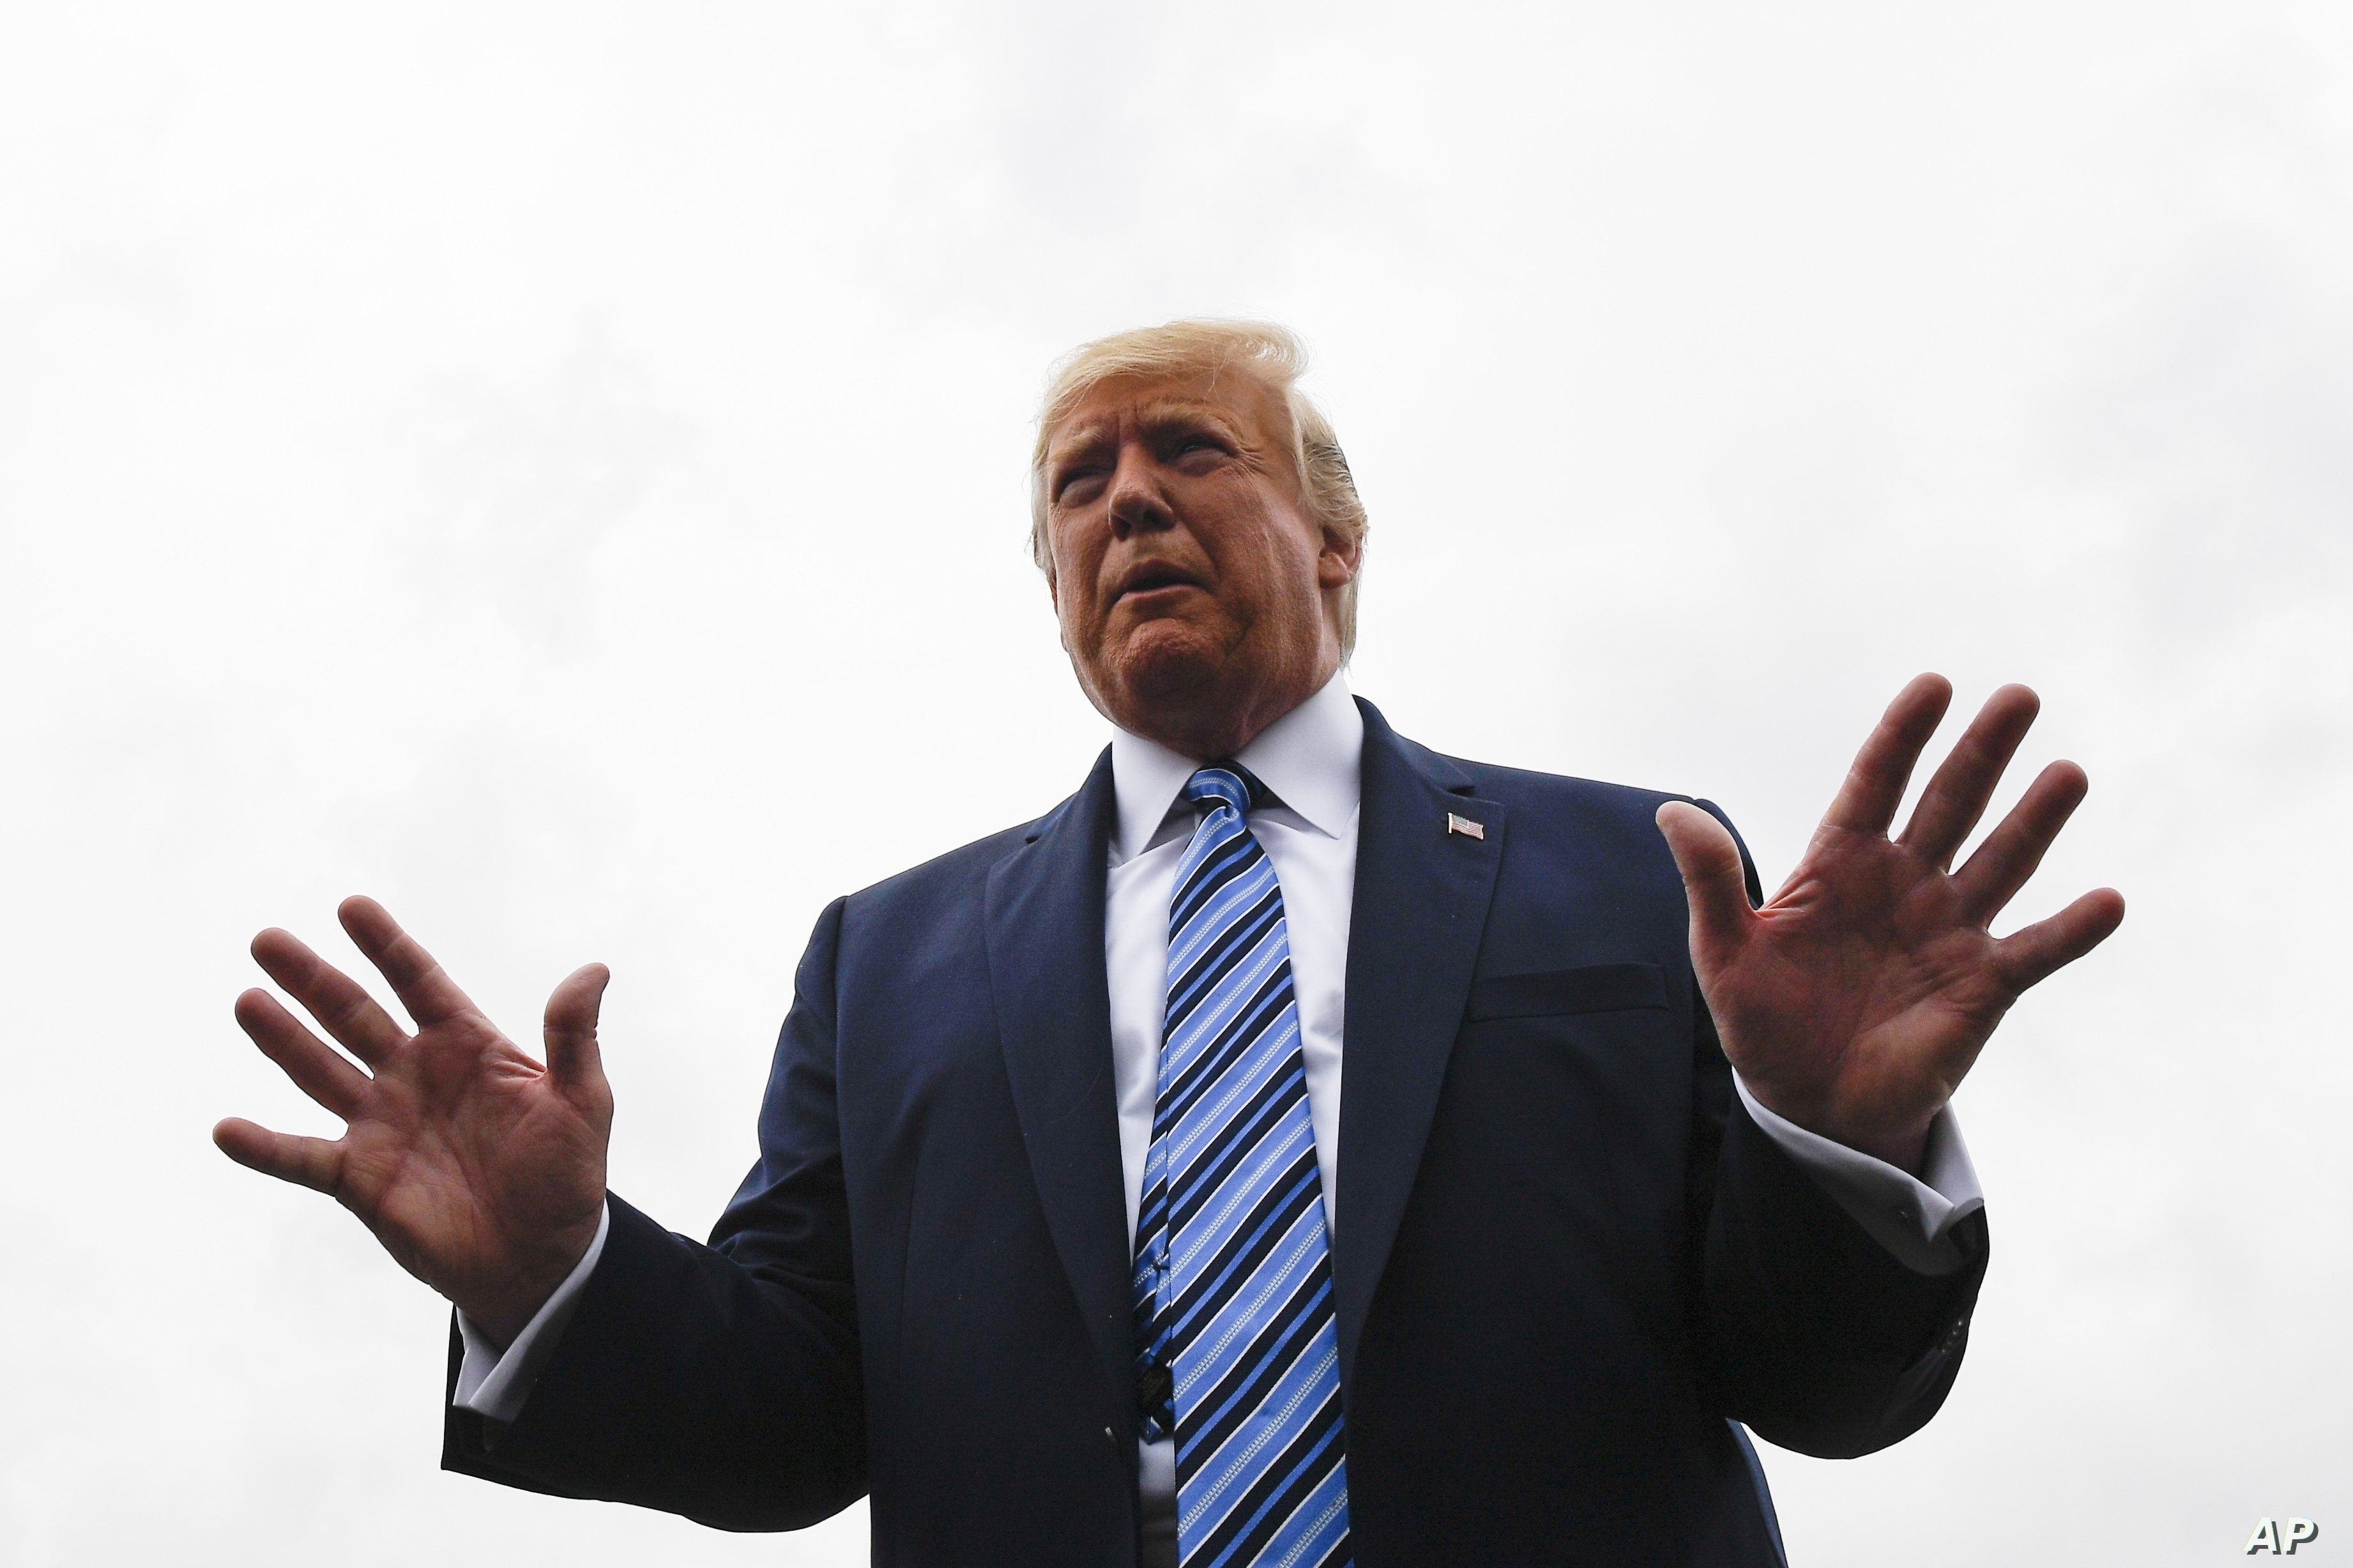 President Donald Trump talks to reporters at Morristown Municipal Airport in Morristown, N.J., Aug. 13, 2019.